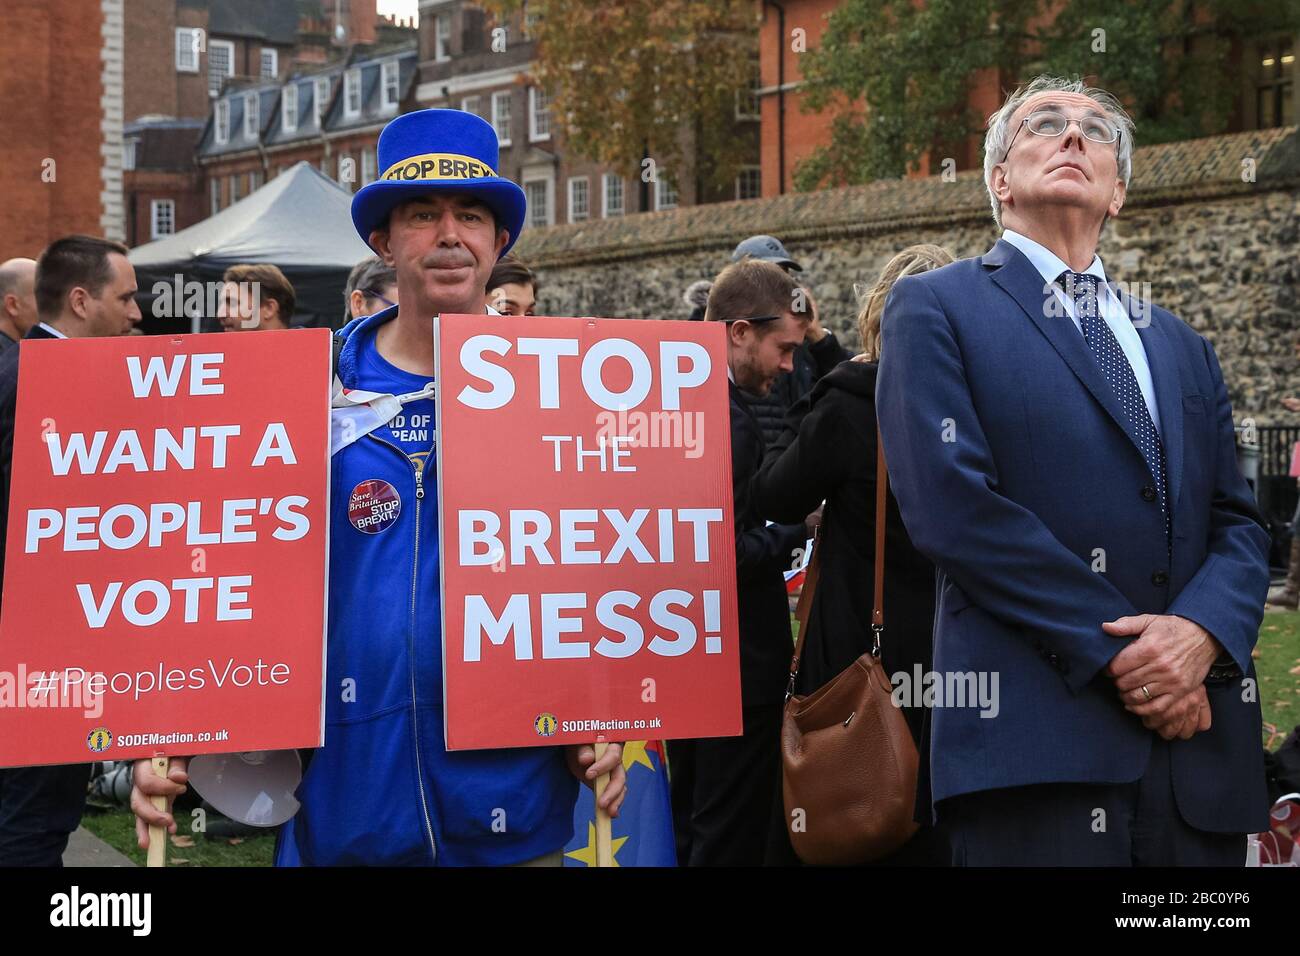 Peter Bone (r), Conservative MP in Westminster, with Anti-Brexit protester Steven Bray (l) and his signs in the background, London, UK Stock Photo